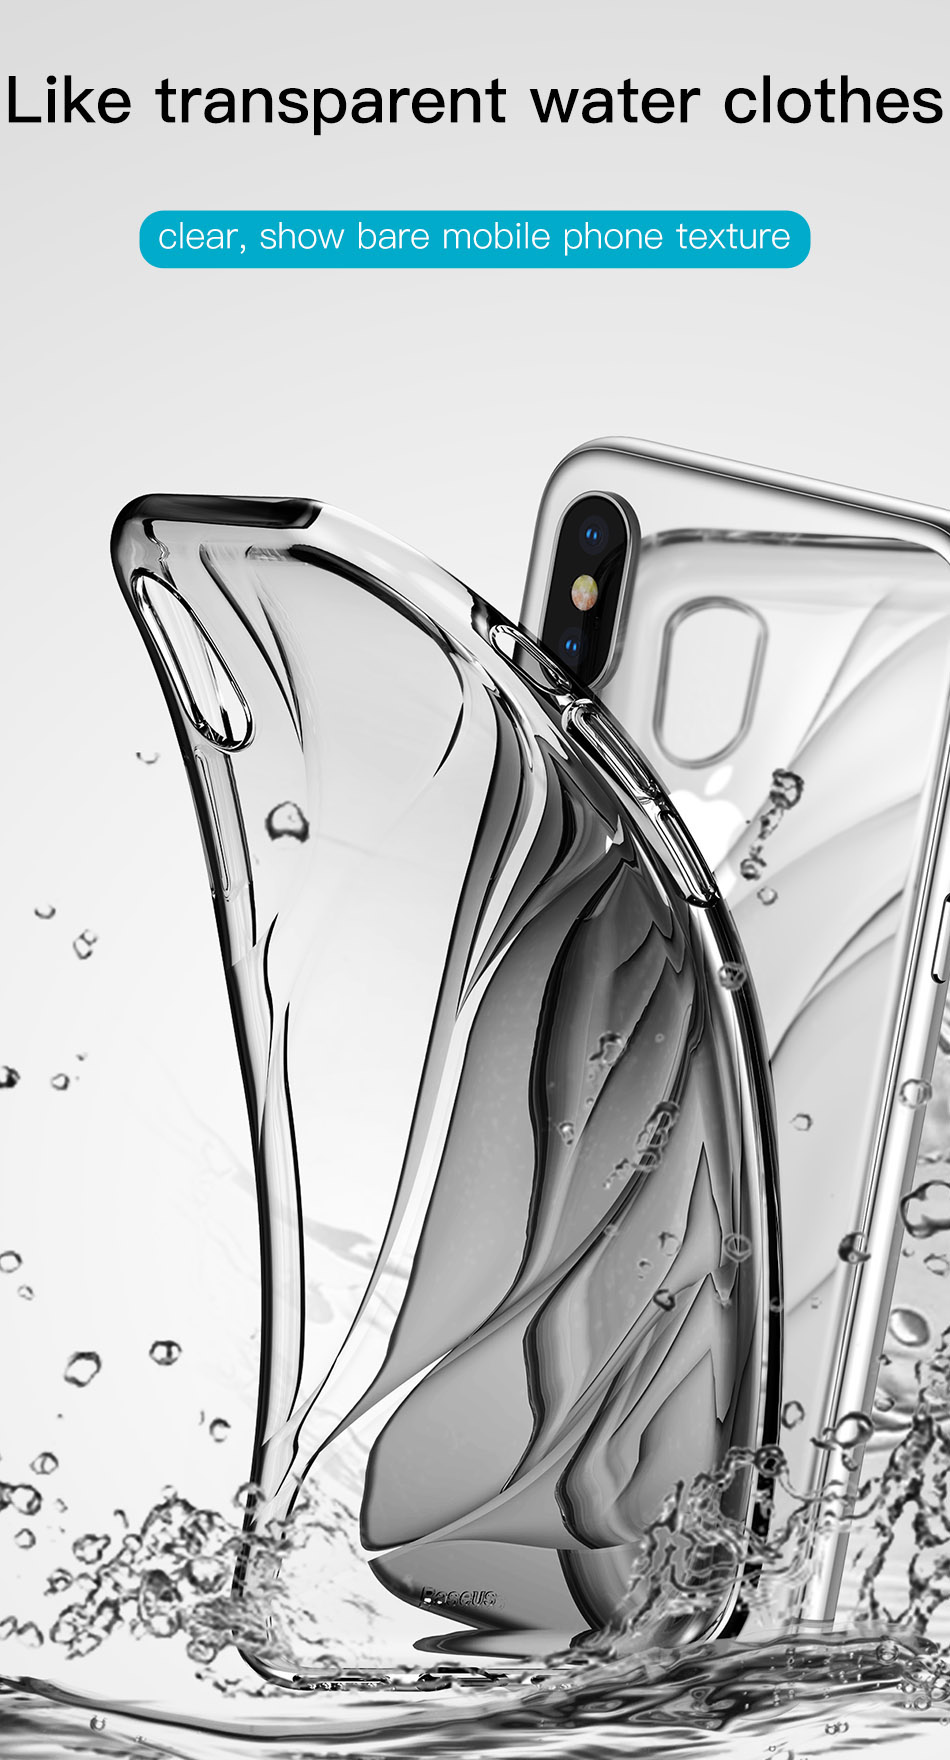 Baseus-Water-Model-Transparent-Soft-TPU-Protective-Case-for-iPhone-X-1293928-2